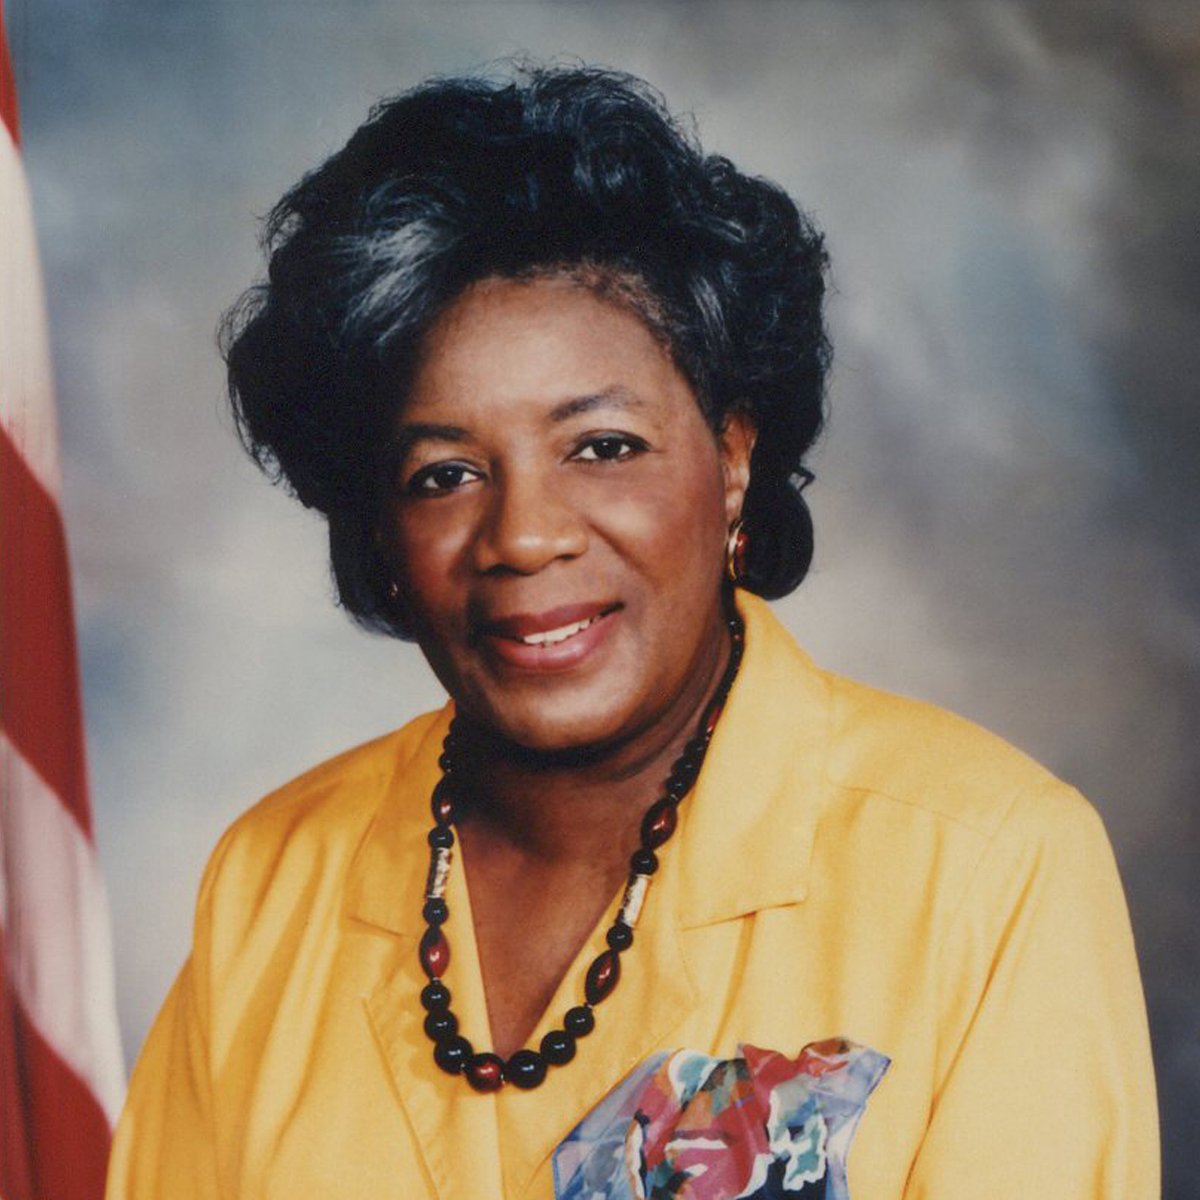 Continuing with #BlackHistoryMonth, we want to highlight Minnie McNeal Kenny.

Serving in the Intelligence field for 43-years, Ms. McNeal Kenny was personally recognized by President Ronald Reagan and George Bush Sr. for her exceptional service within the field. https://t.co/bhwjvkuYZD